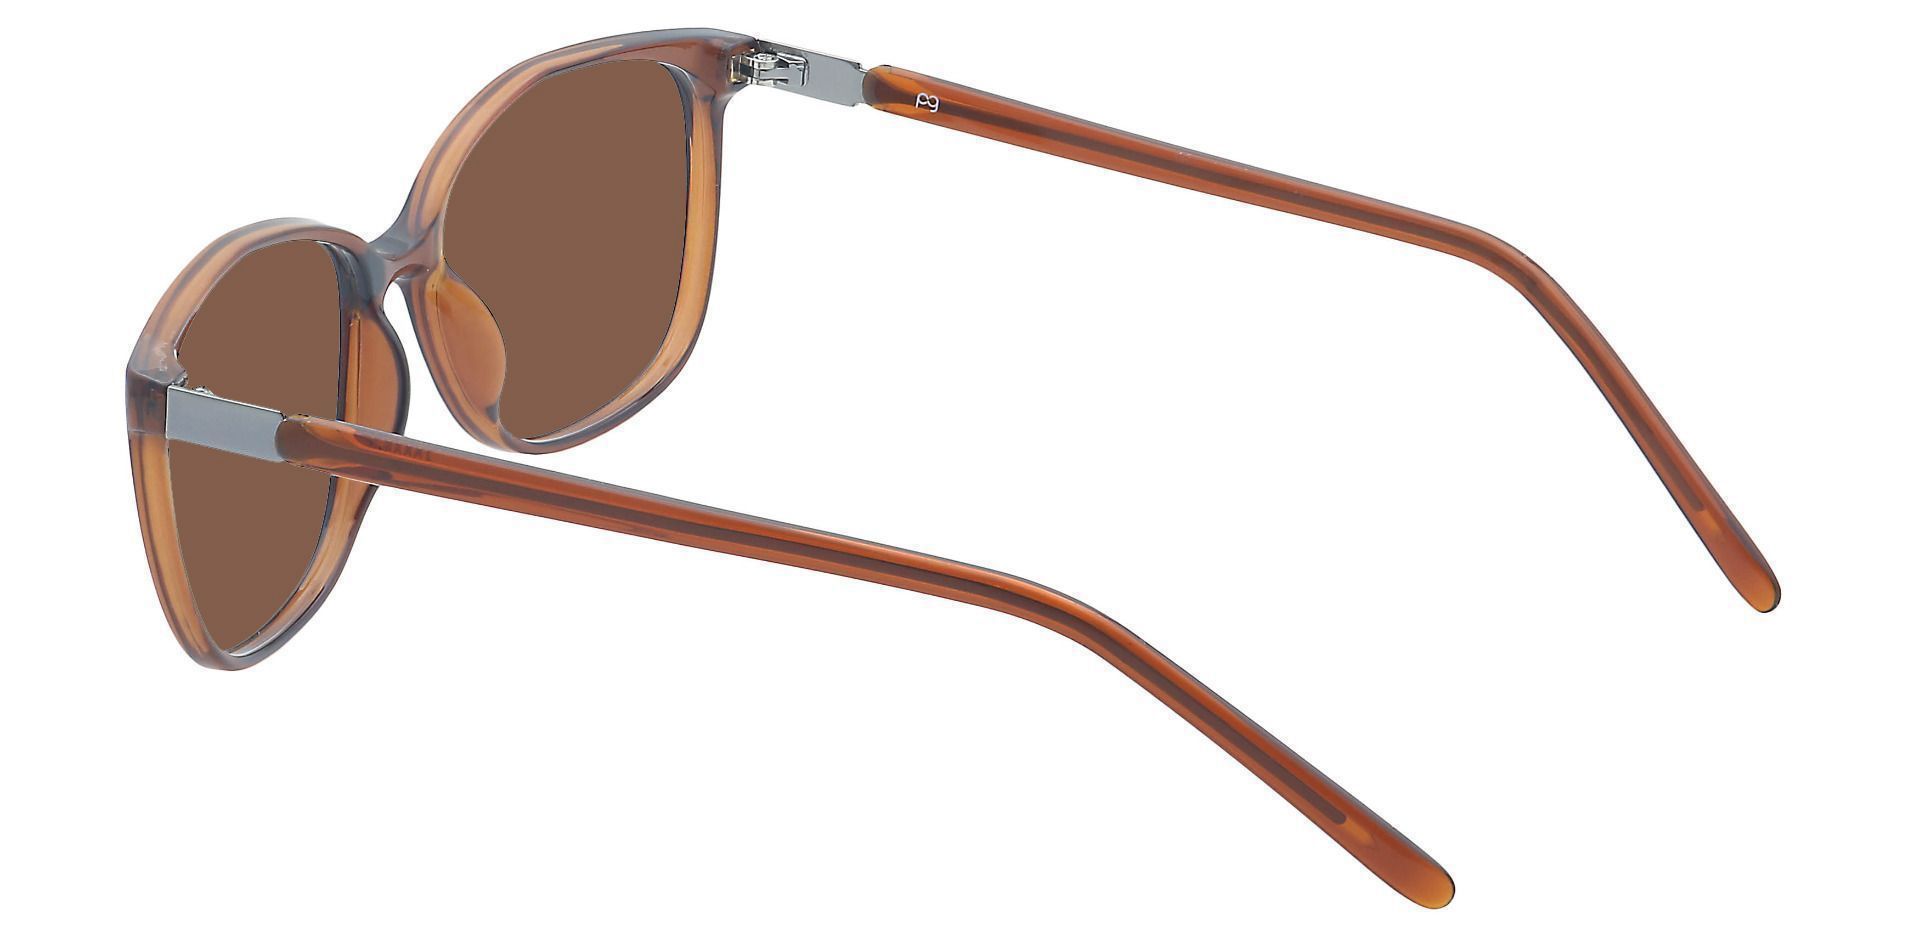 Archie Square Non-Rx Sunglasses - Brown Frame With Brown Lenses